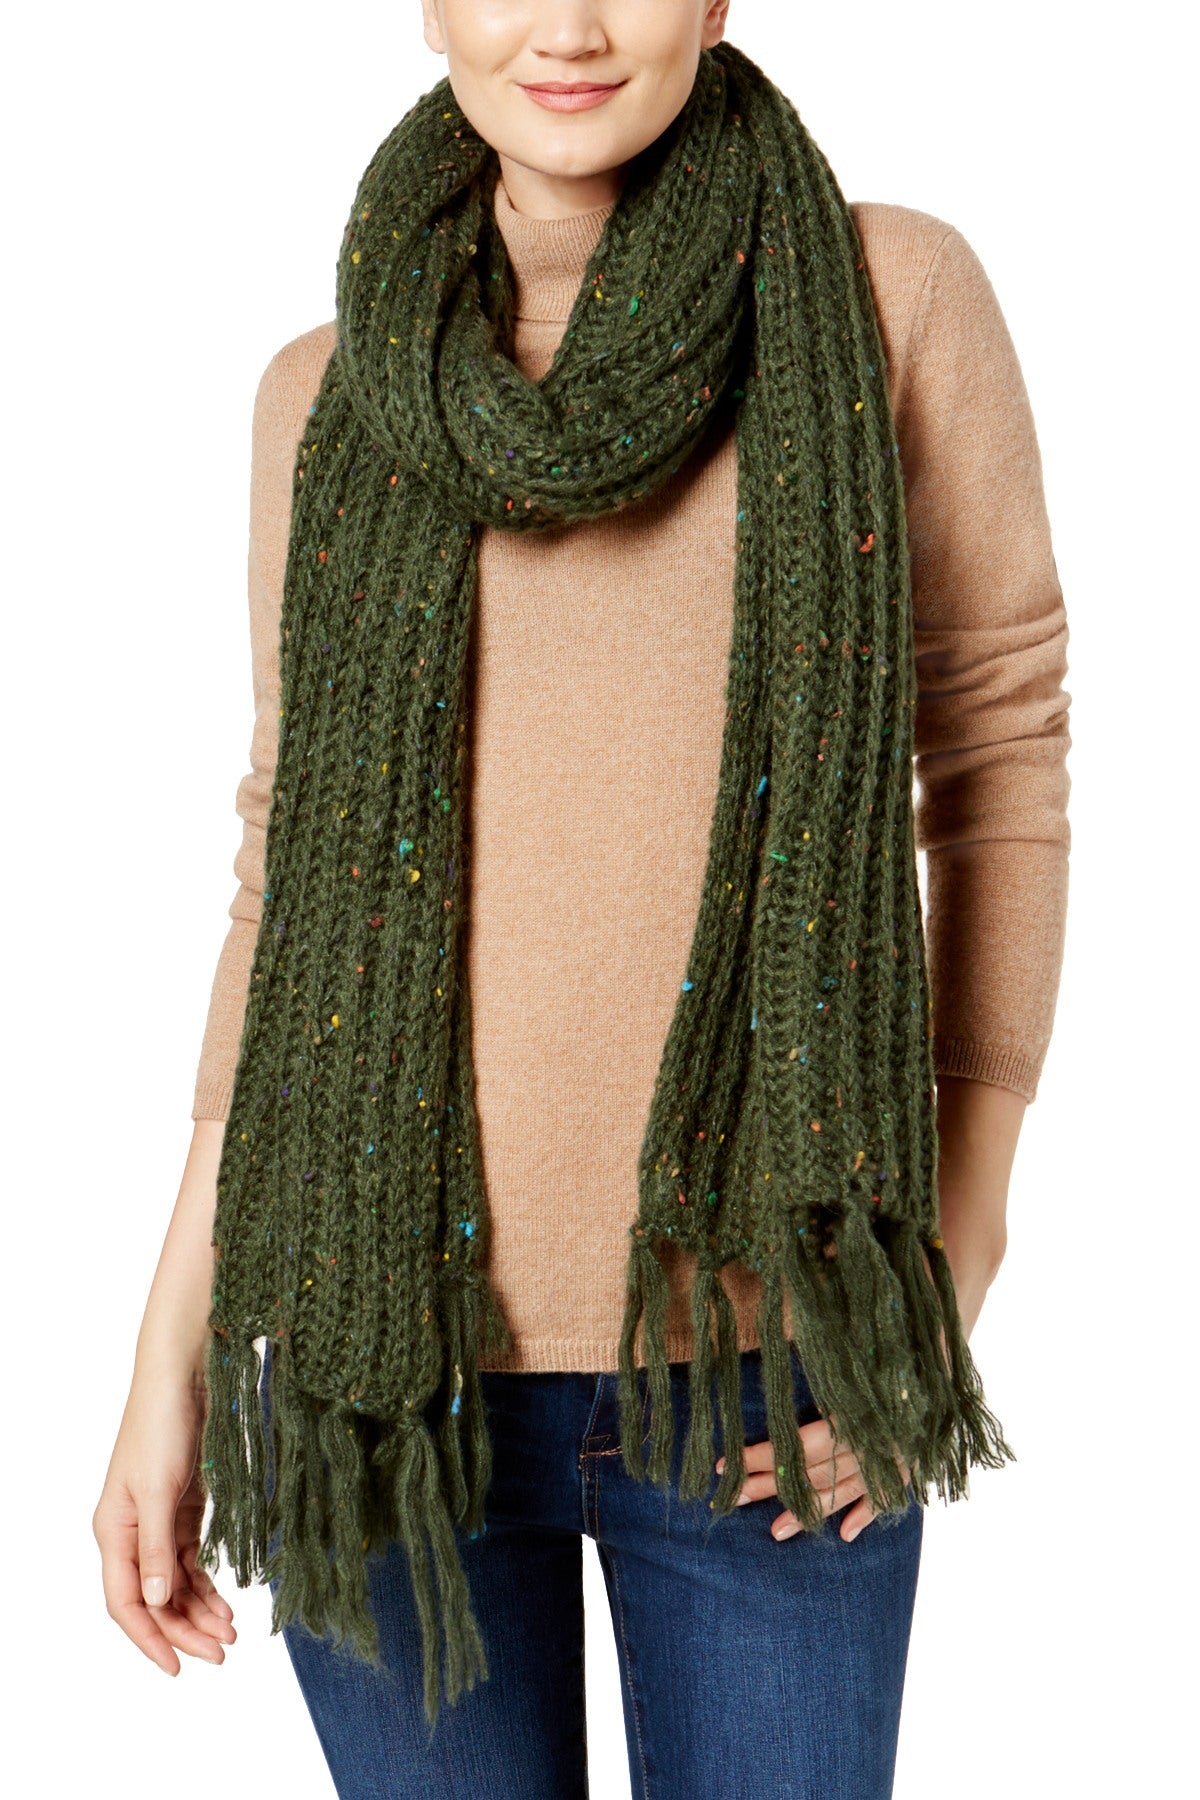 Steve Madden Military-Green Speckled Soft-Knit Scarf